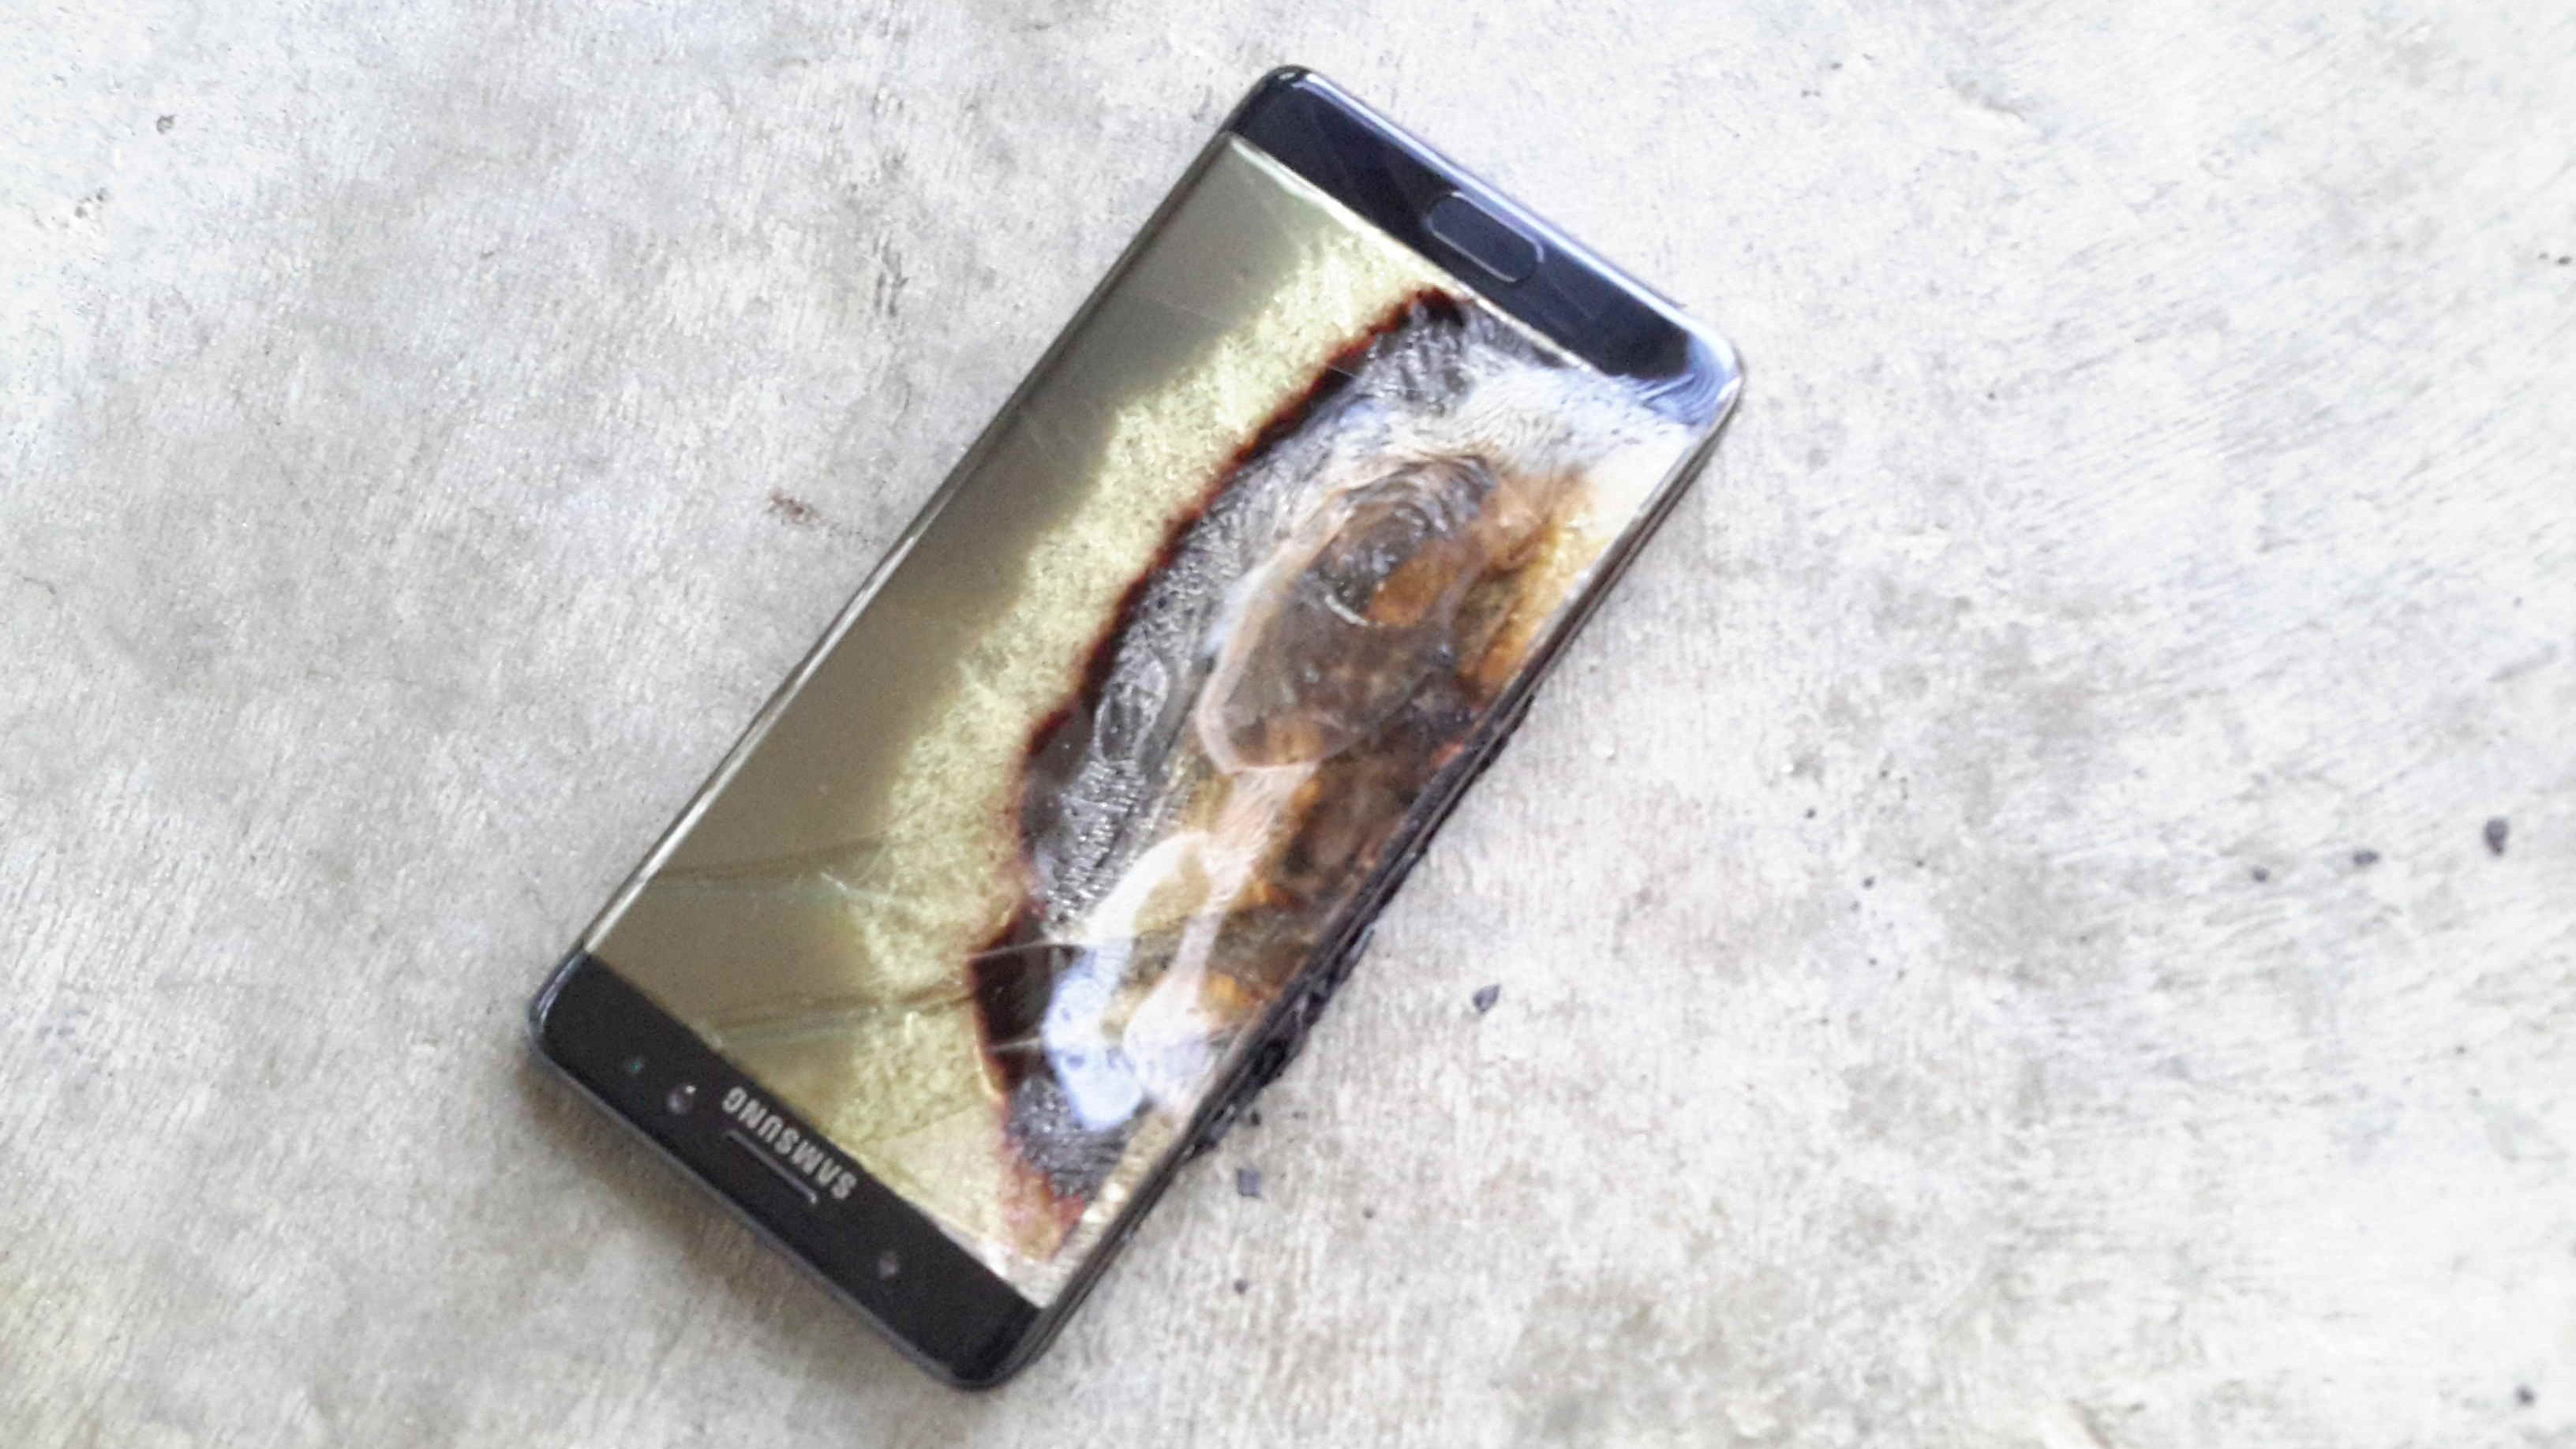 Ignition problems in Note7